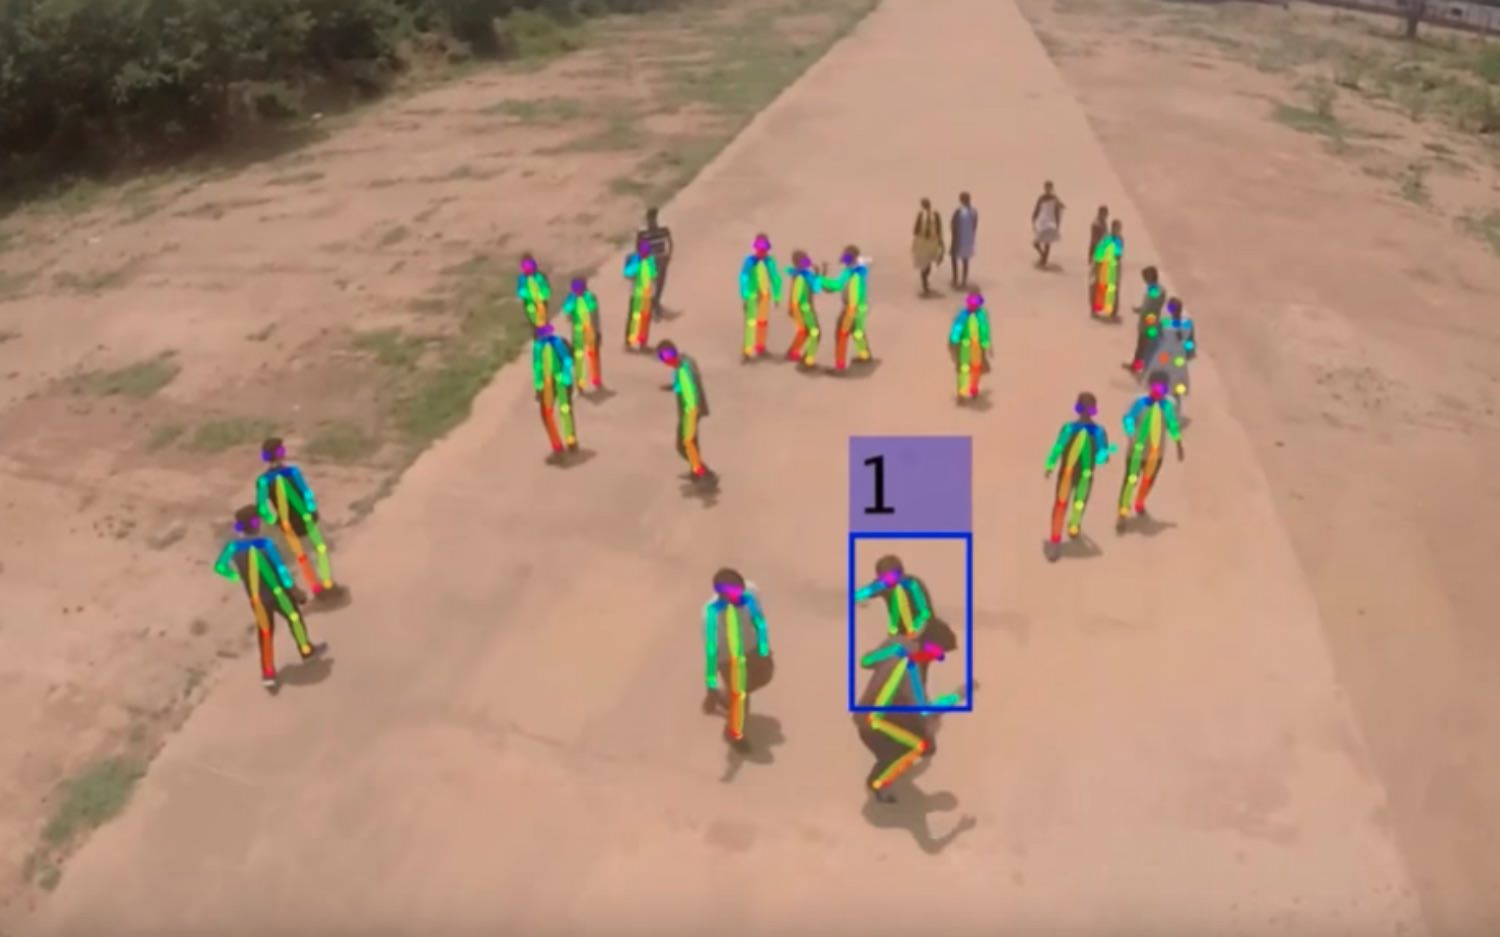 Using a drone and AI to spot fighting people in a crowd